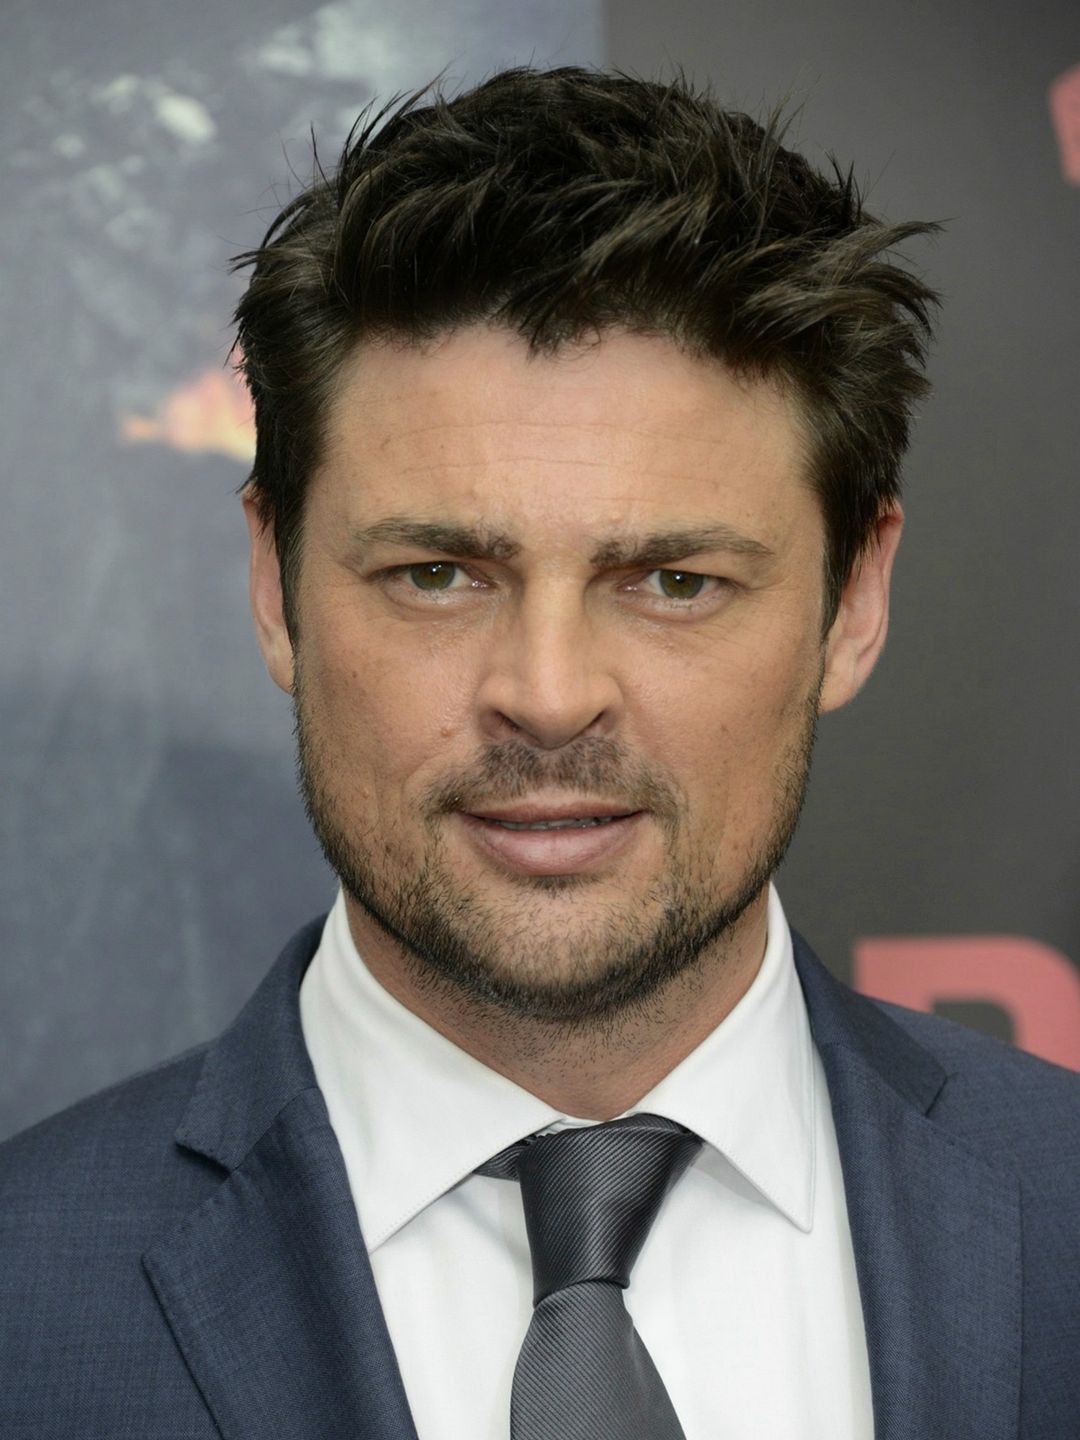 Karl Urban does he have a wife